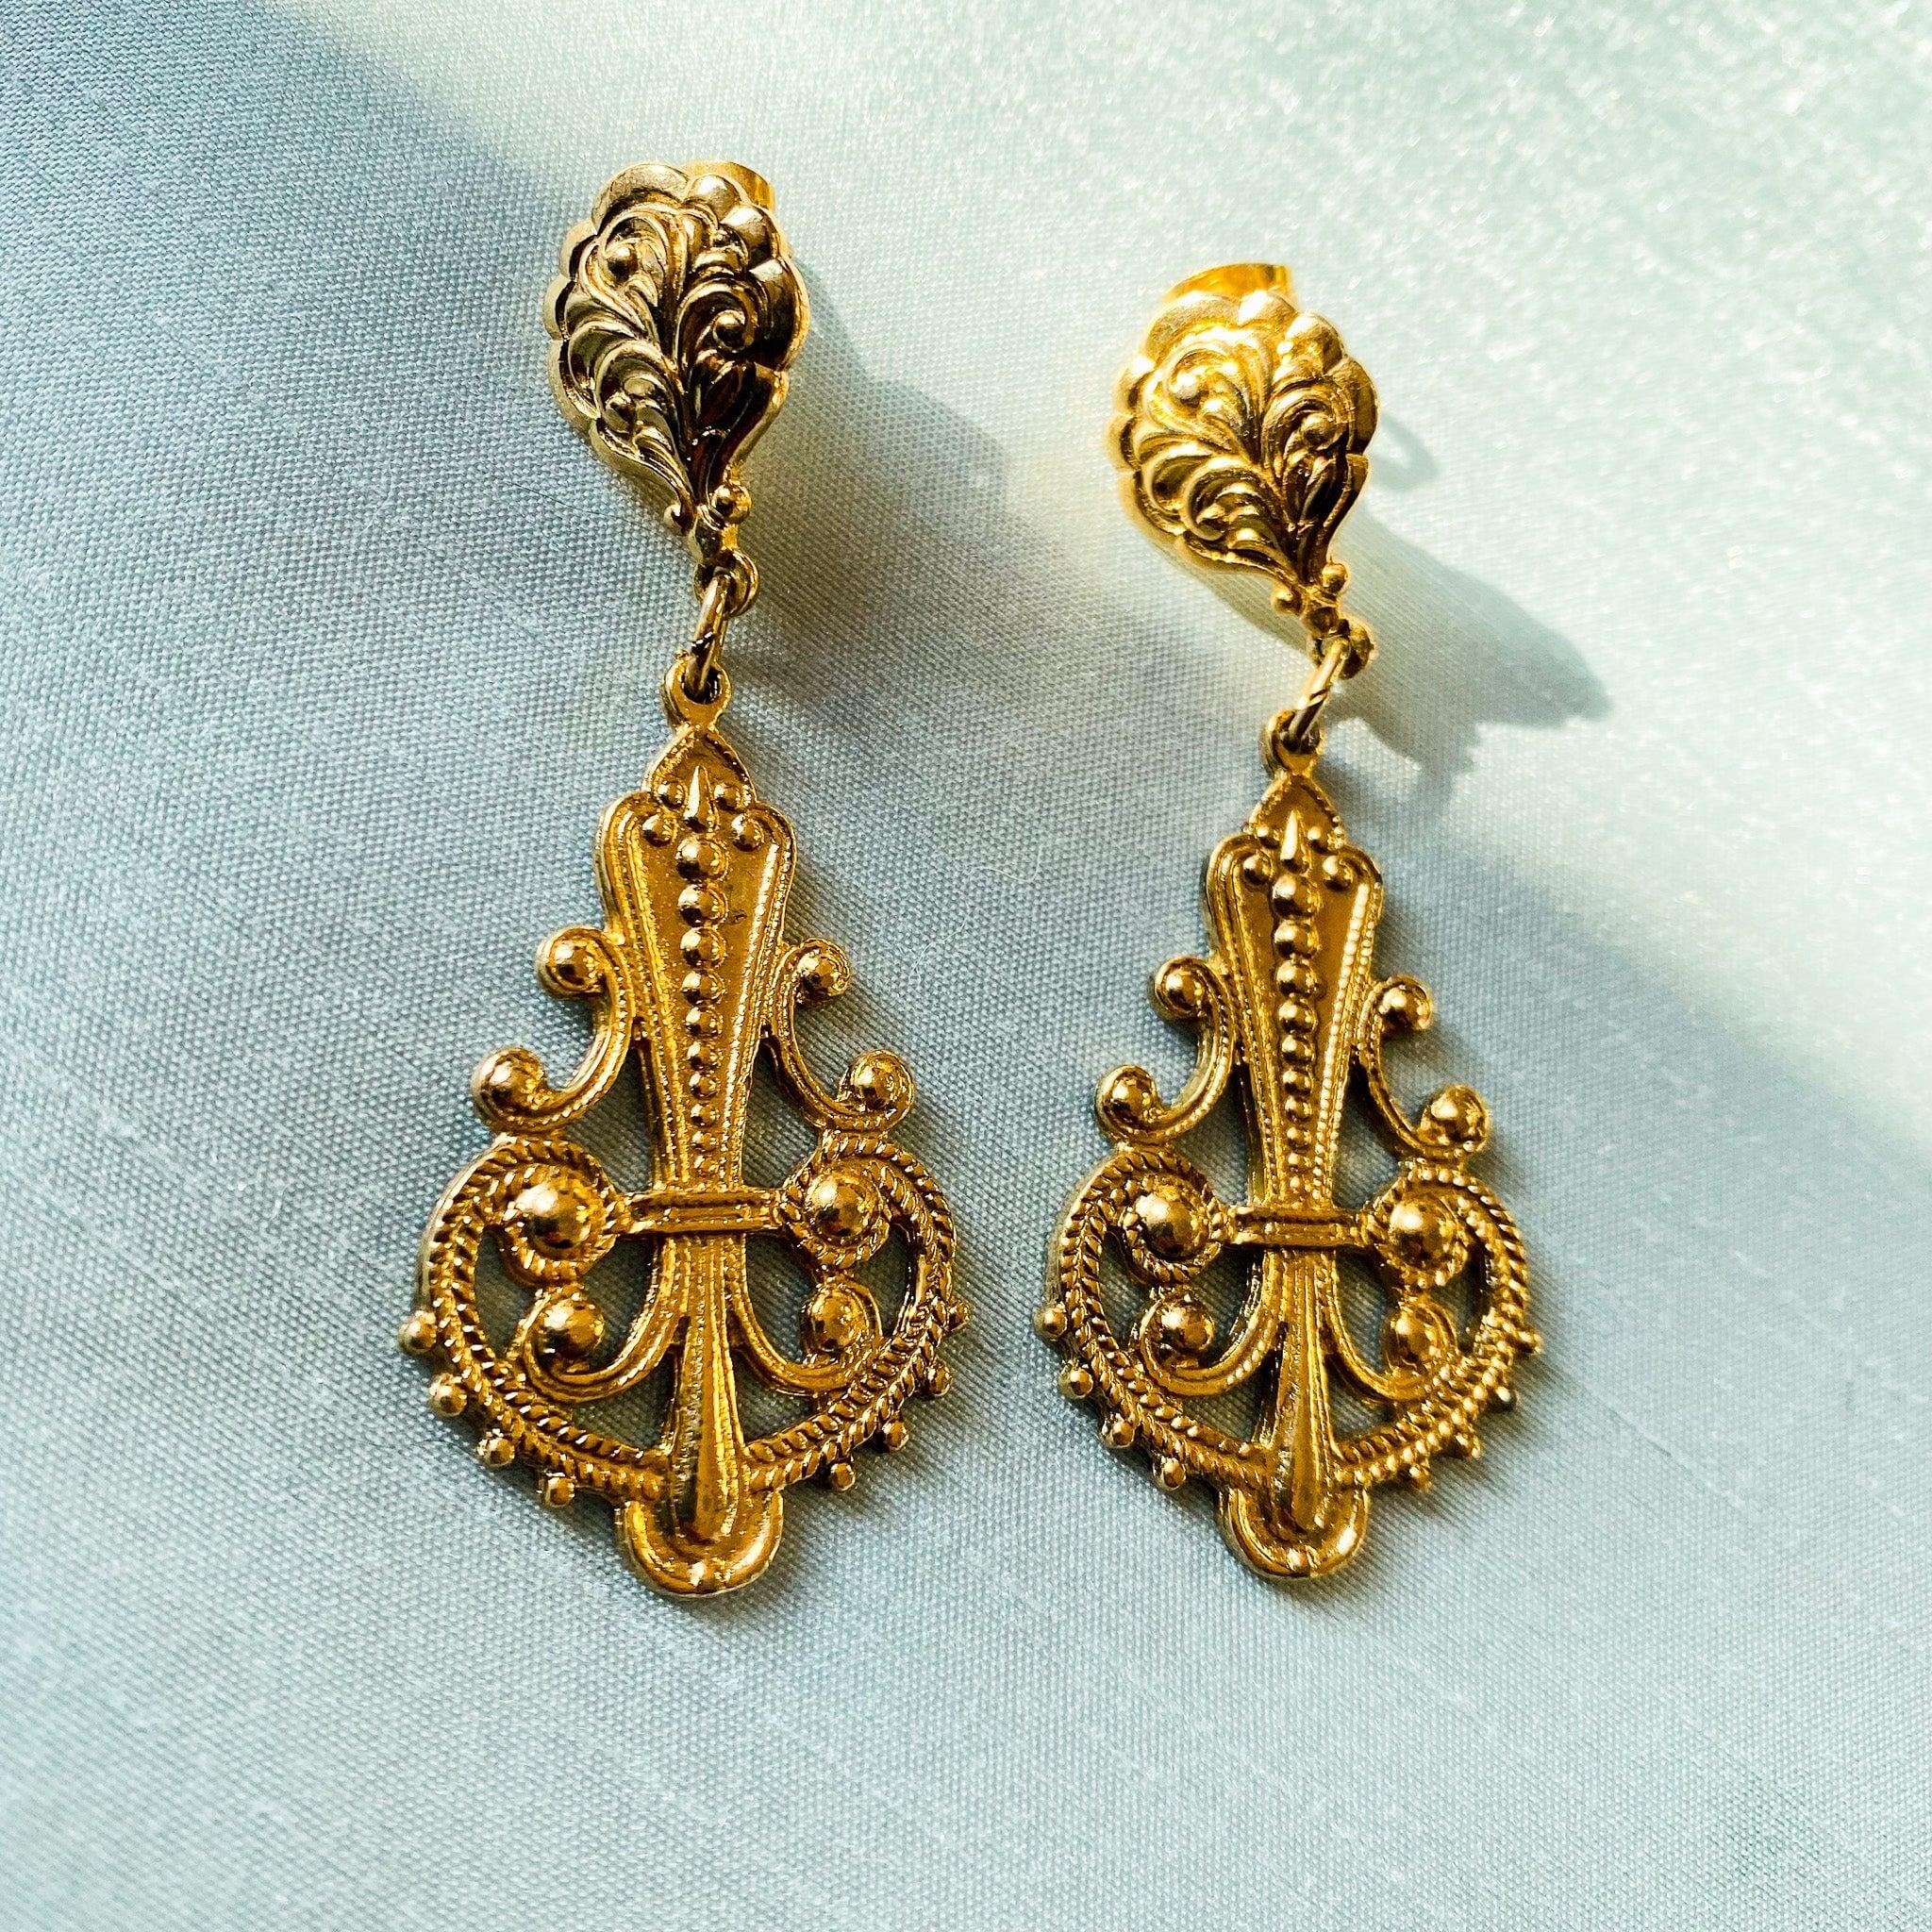 Baroque Vintage 1980s Earrings for Pierced Ears - 18 Carat Gold Plated Vintage Deadstock For Sale